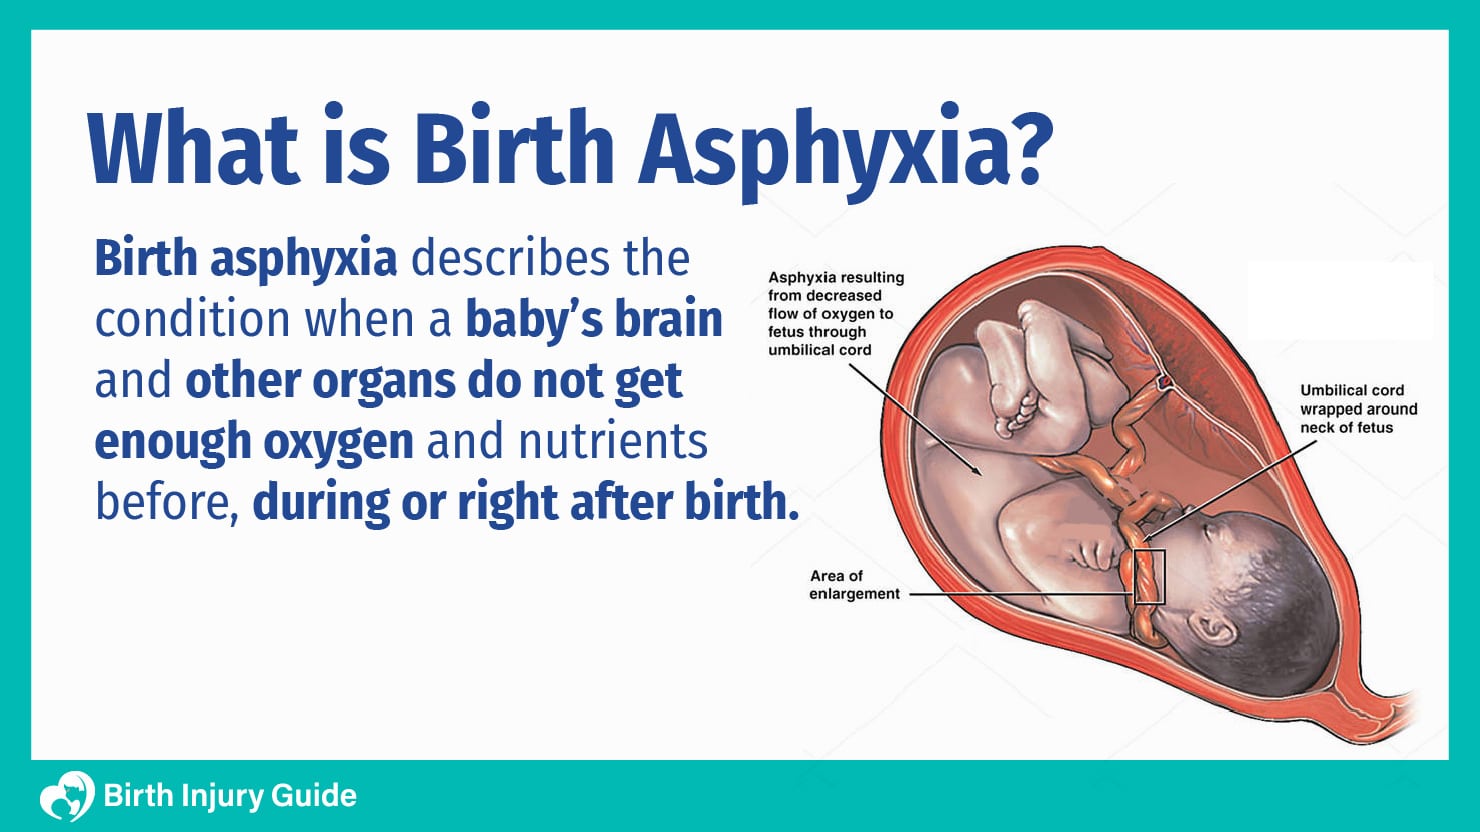 what is birth asphyxia?